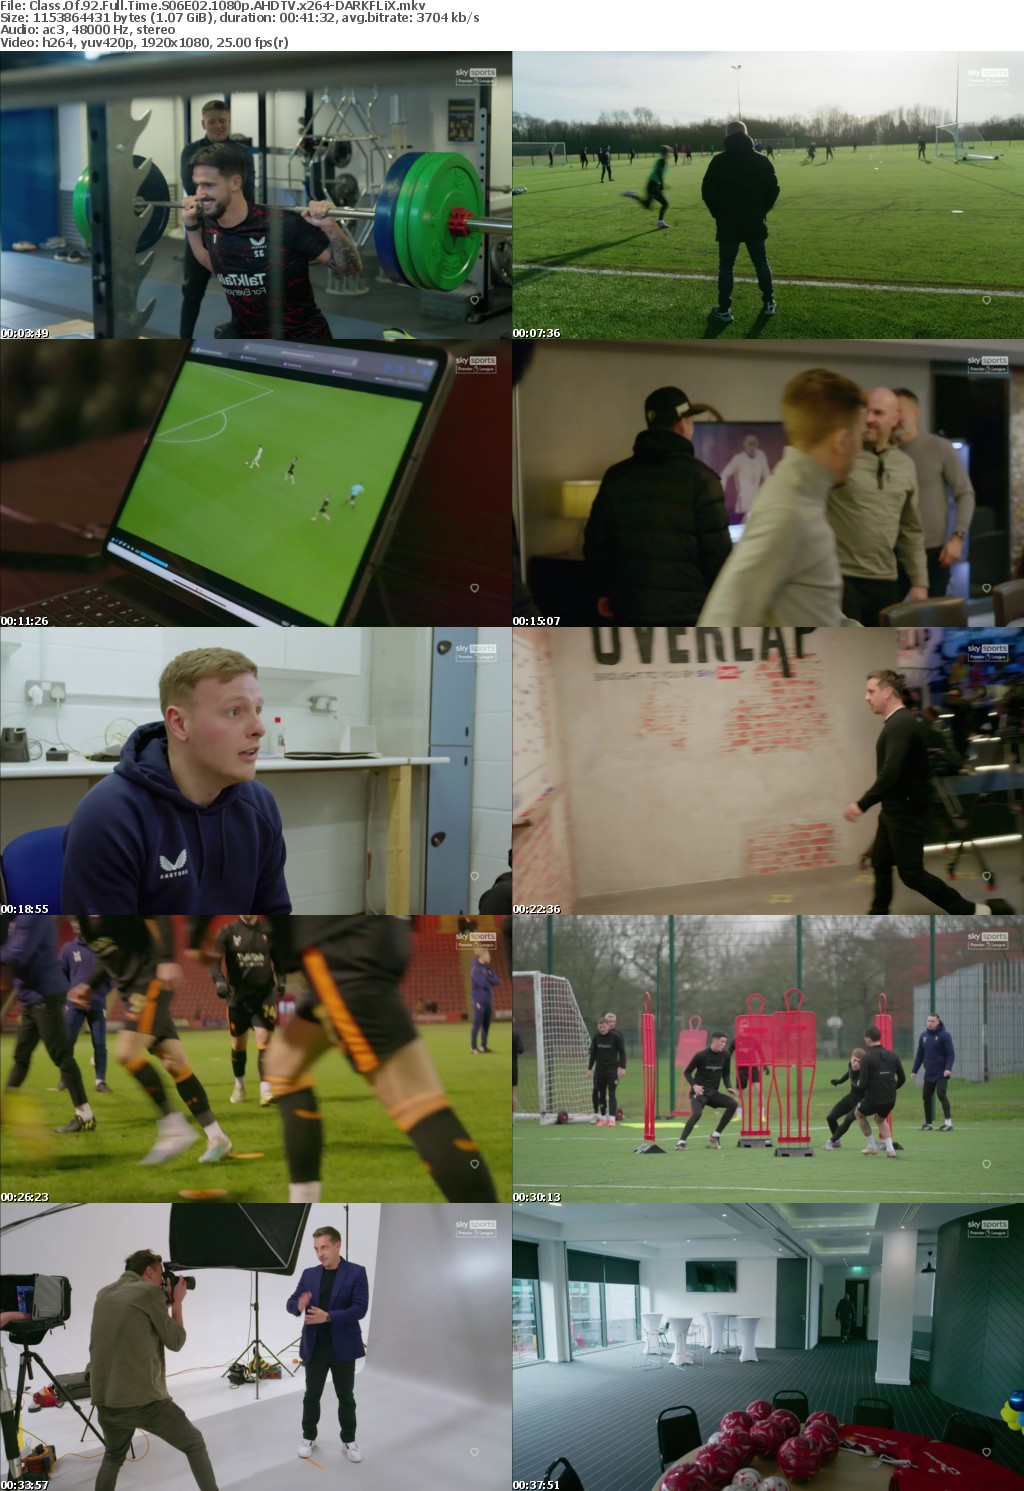 Class Of 92 Full Time S06E02 1080p AHDTV x264-DARKFLiX